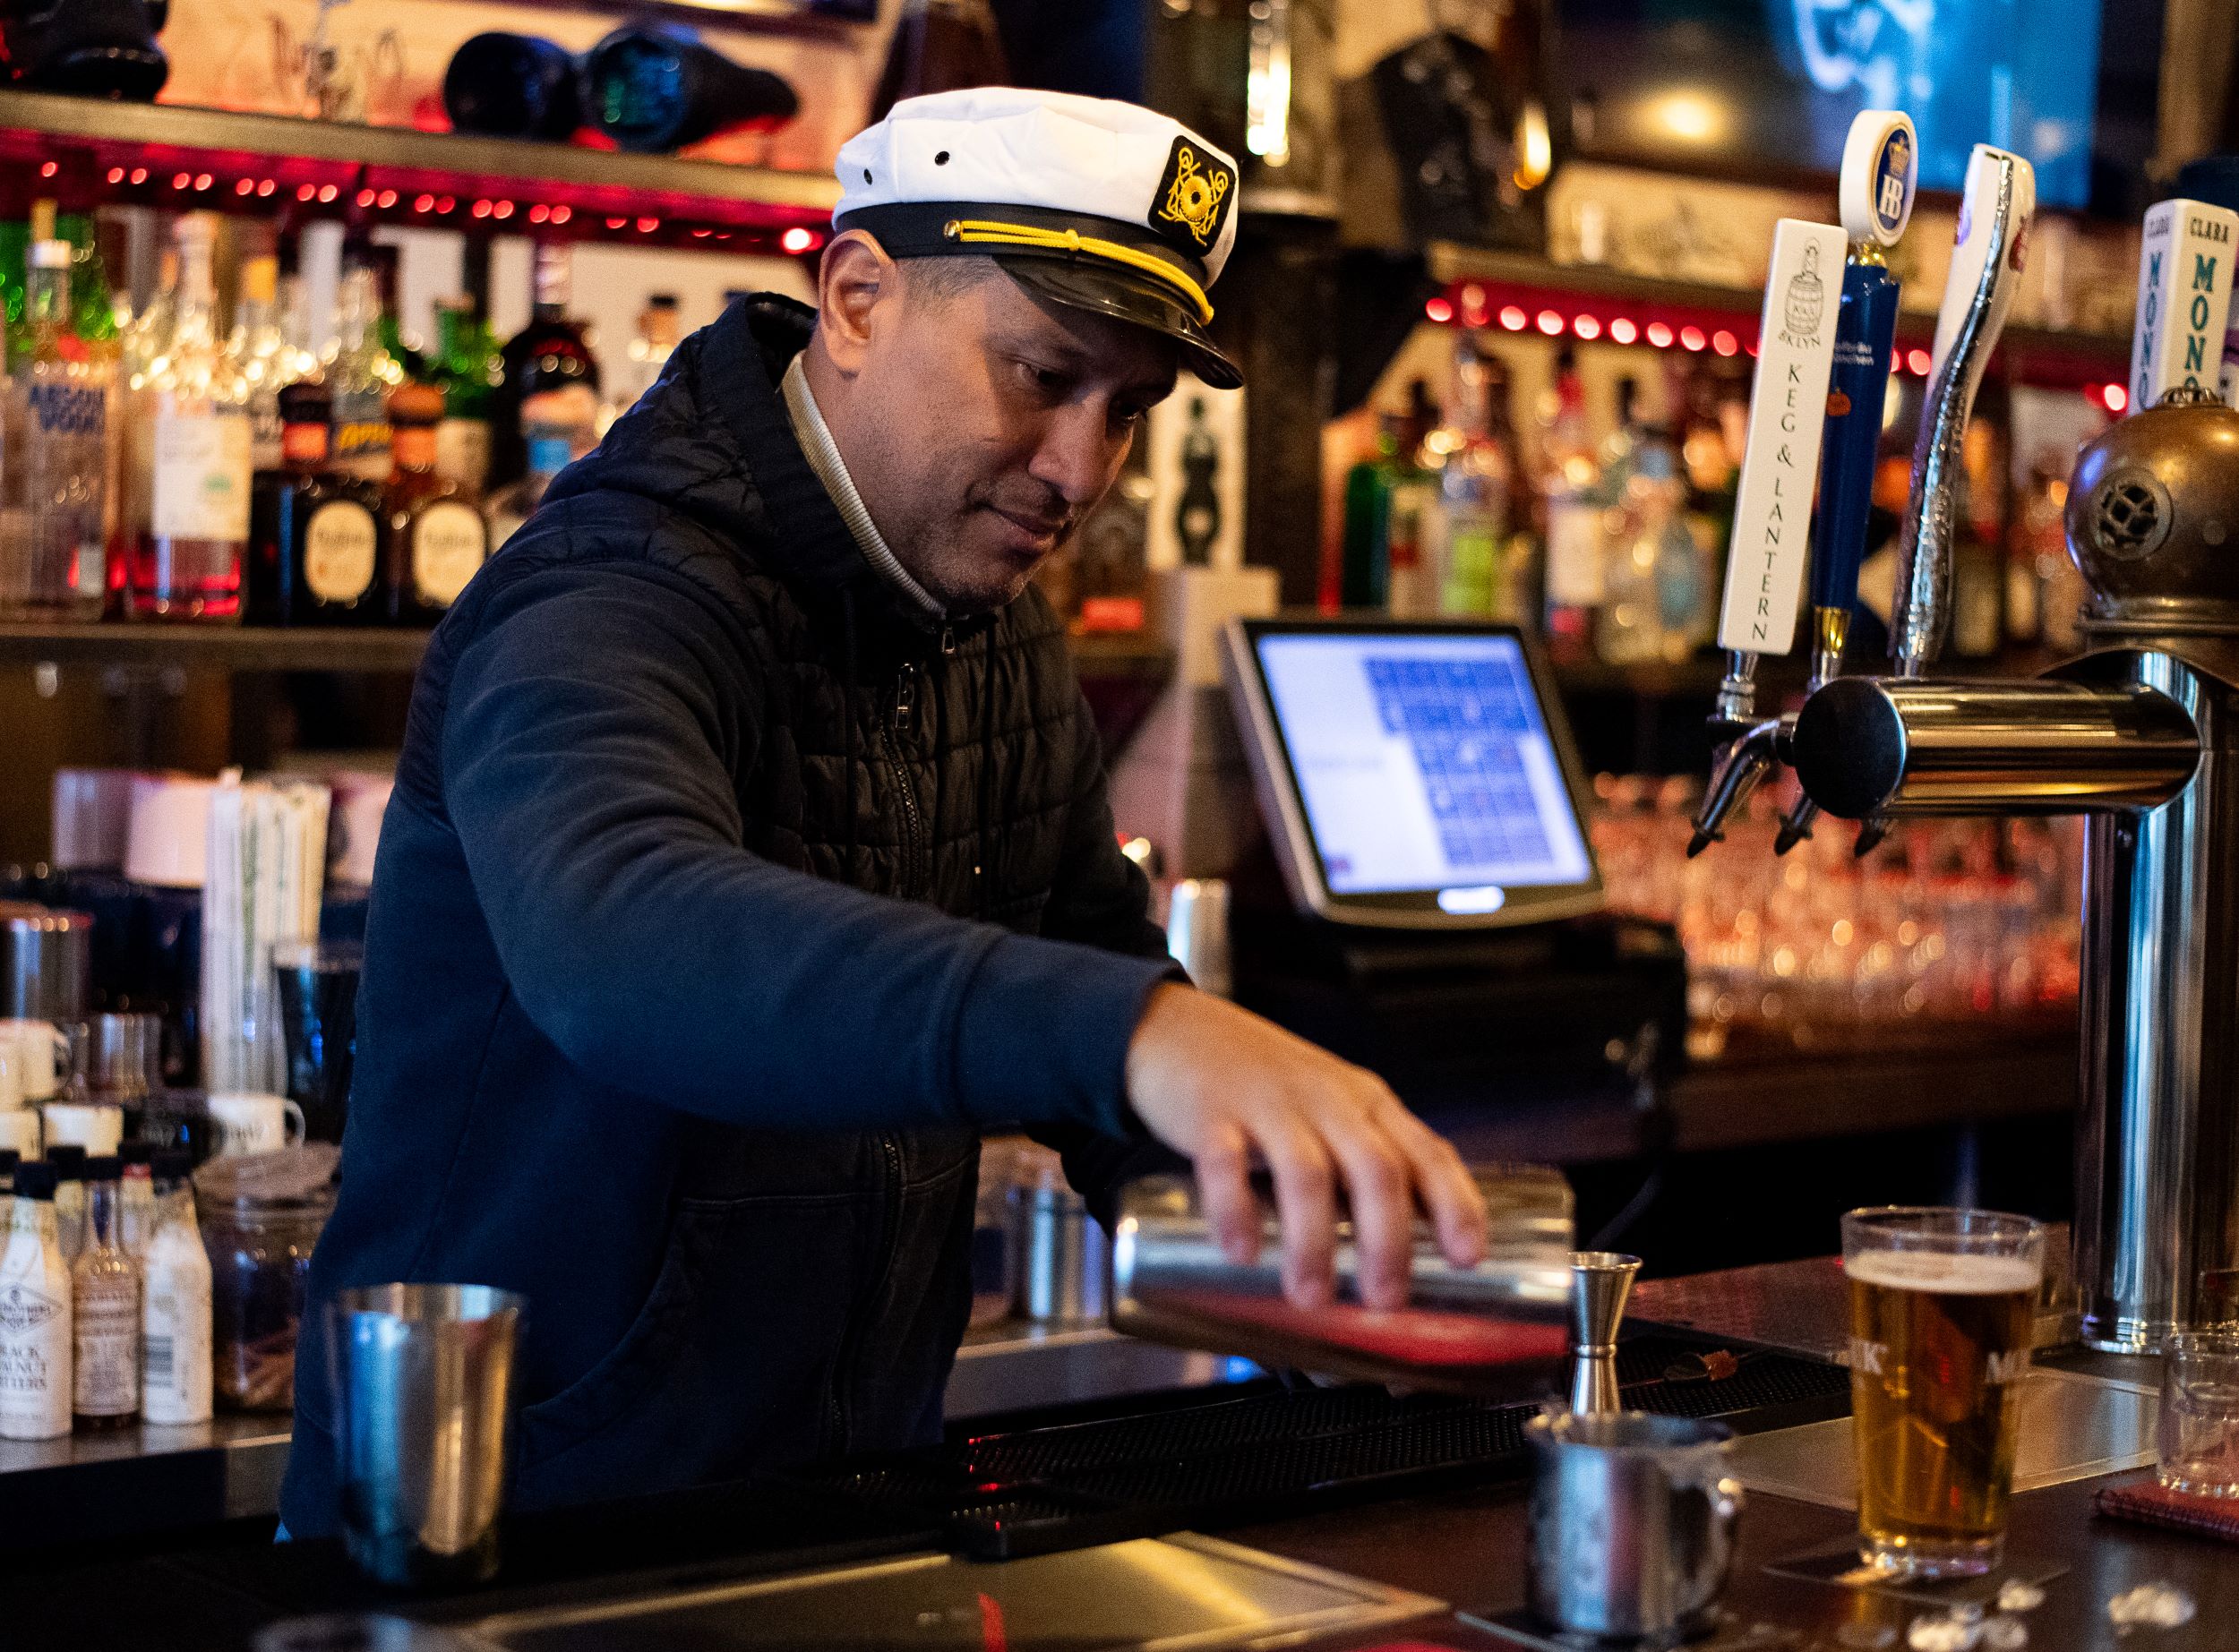 A bartender wearing a captain's hat serves drinks at a bar, with beer taps and various bottles of liquor in the background.